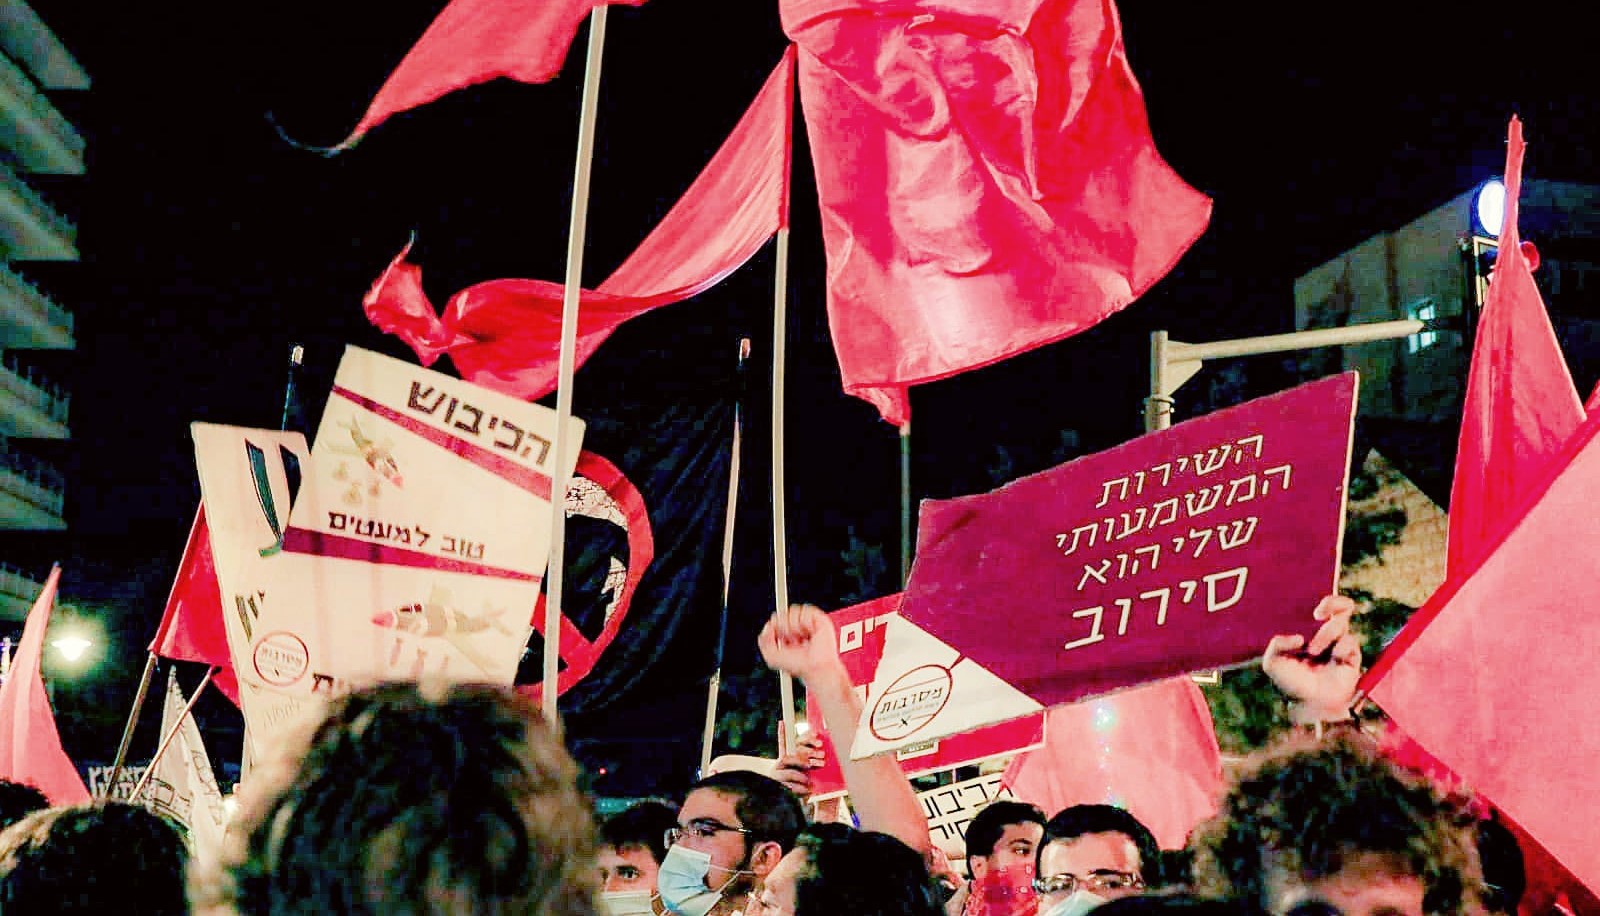 Signers of the latest "Shministim Letter" participate in a demonstration against far-right Prime Minister Benjamin Netanyahu in Jerusalem, September 2020. The placard held aloft on the right reads: "My significant service is refusal."